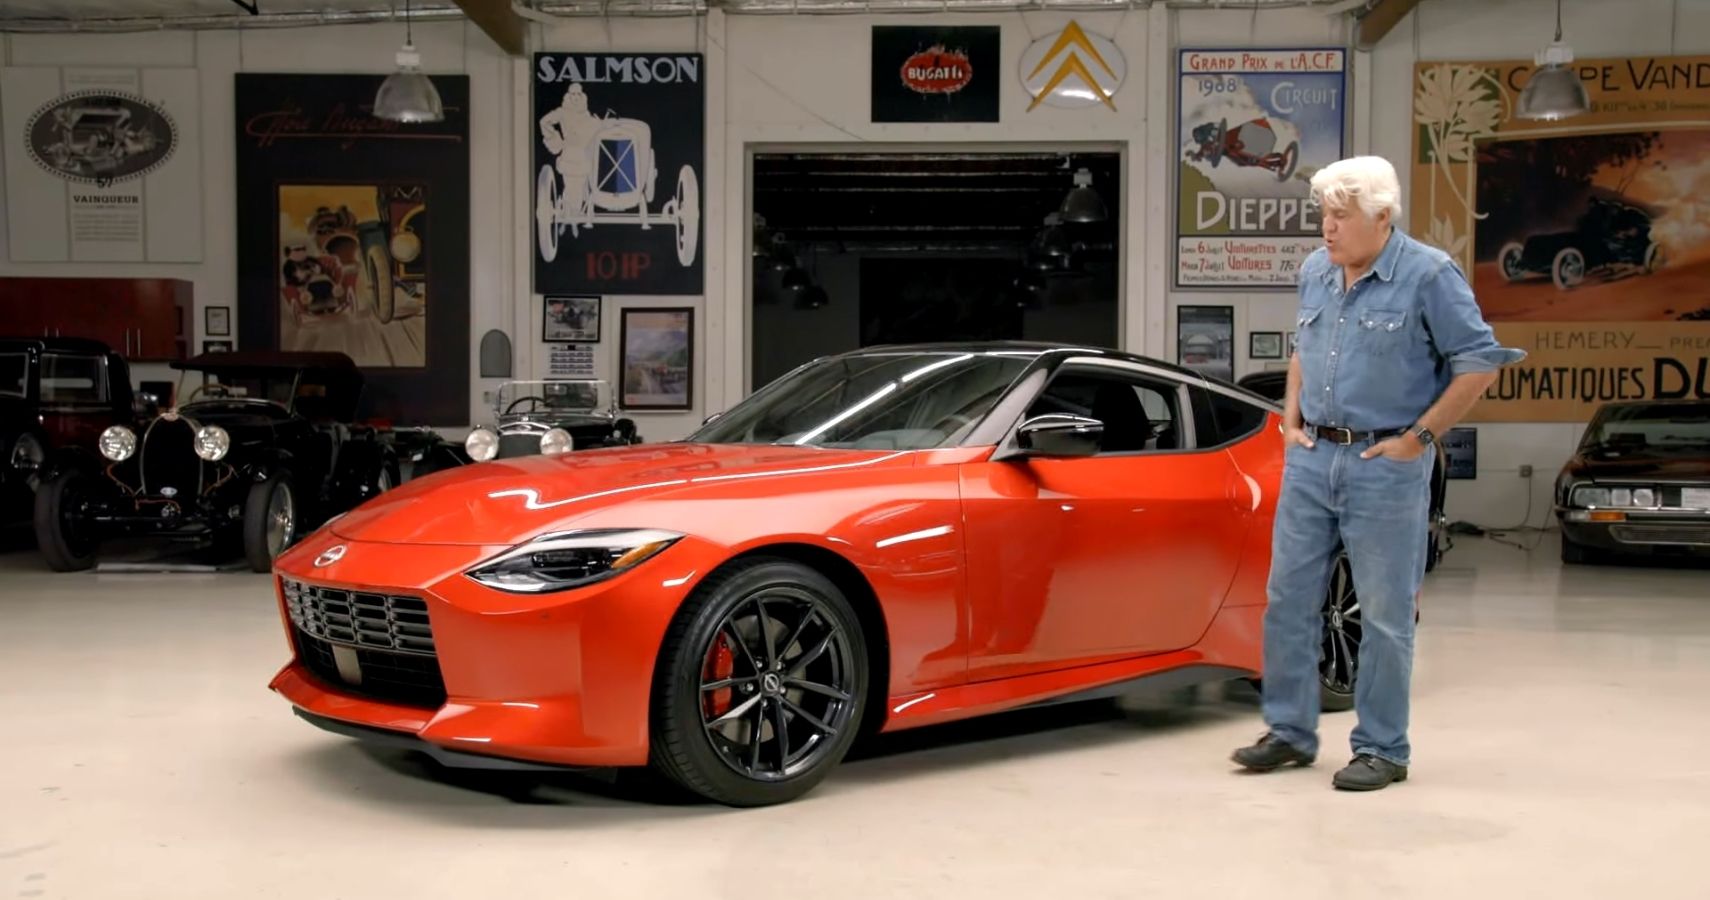 Find Out What Jay Leno Really Thinks About The 2023 Nissan Z